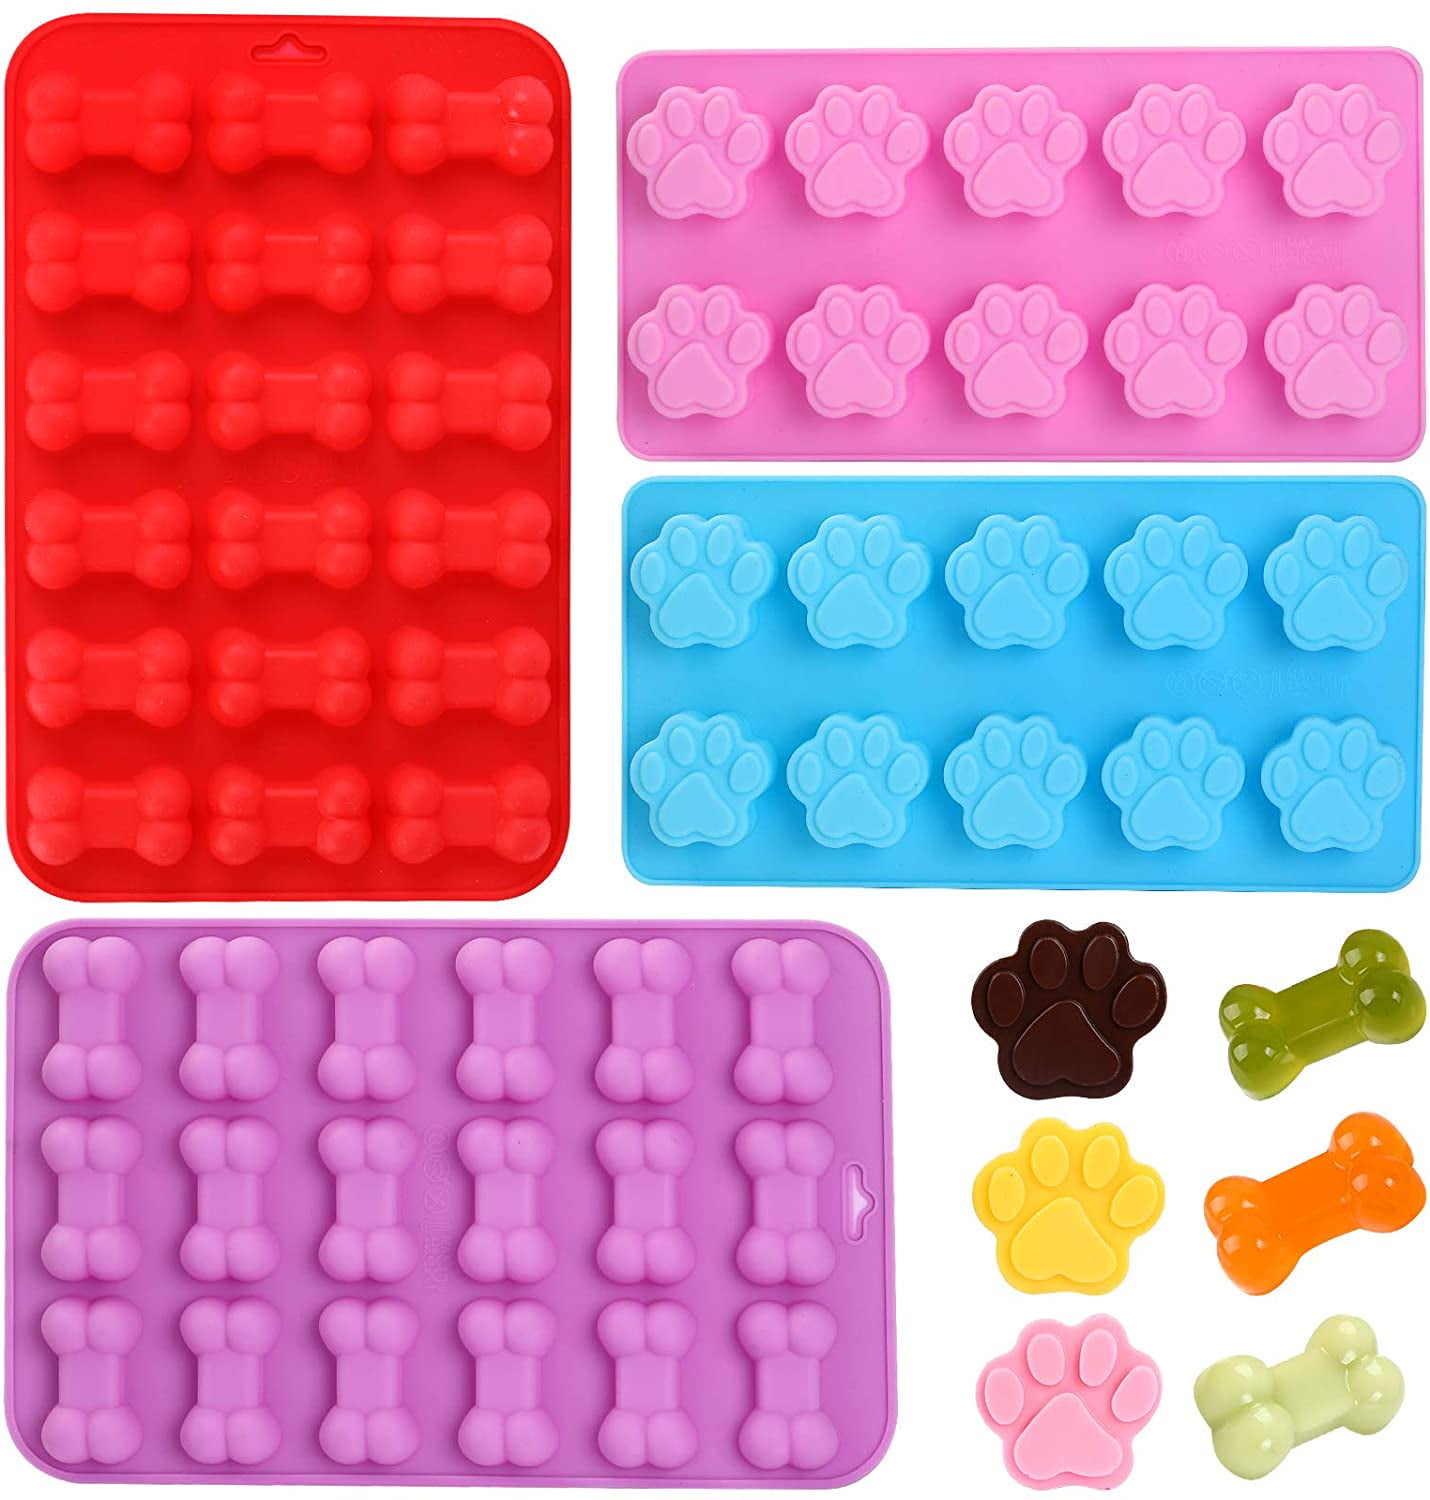 RYCORE Dog Bone Silicone Molds | Silicone Molds for Pet Lovers | Pet-Inspired Treats | 2 Pack